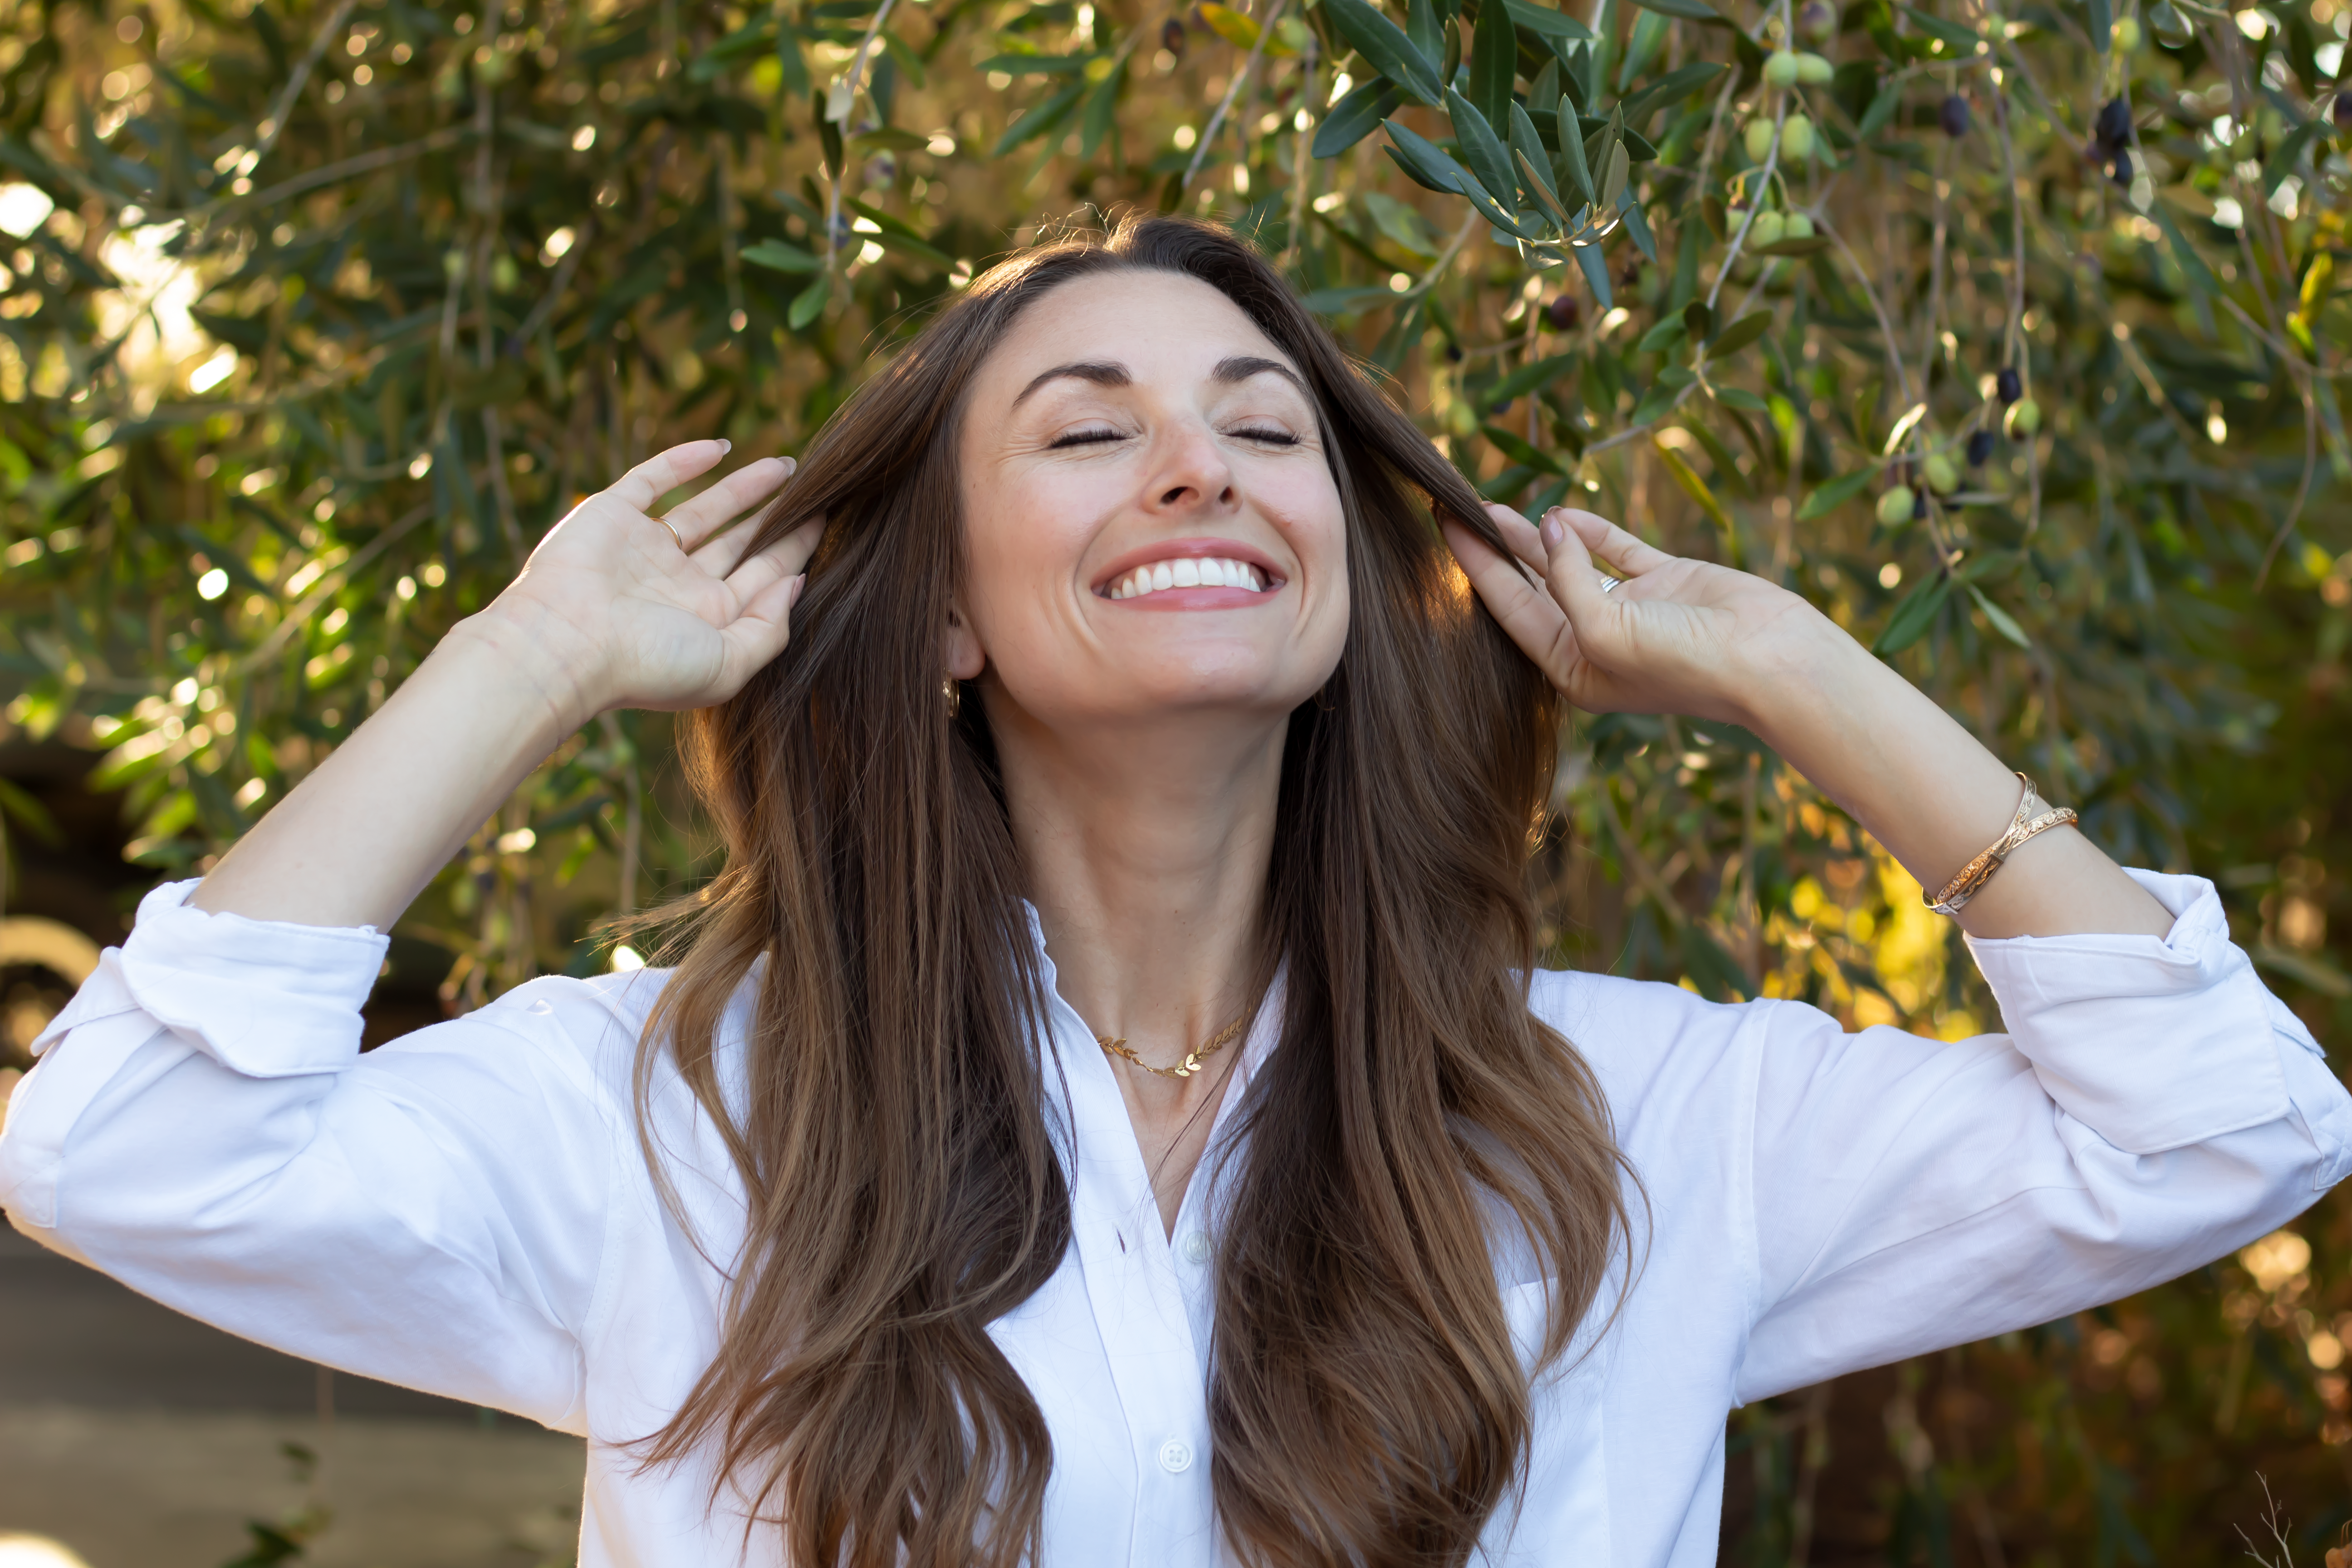 Woman with long brown hair in a white button up shirt smiling and looking up with her eyes closed